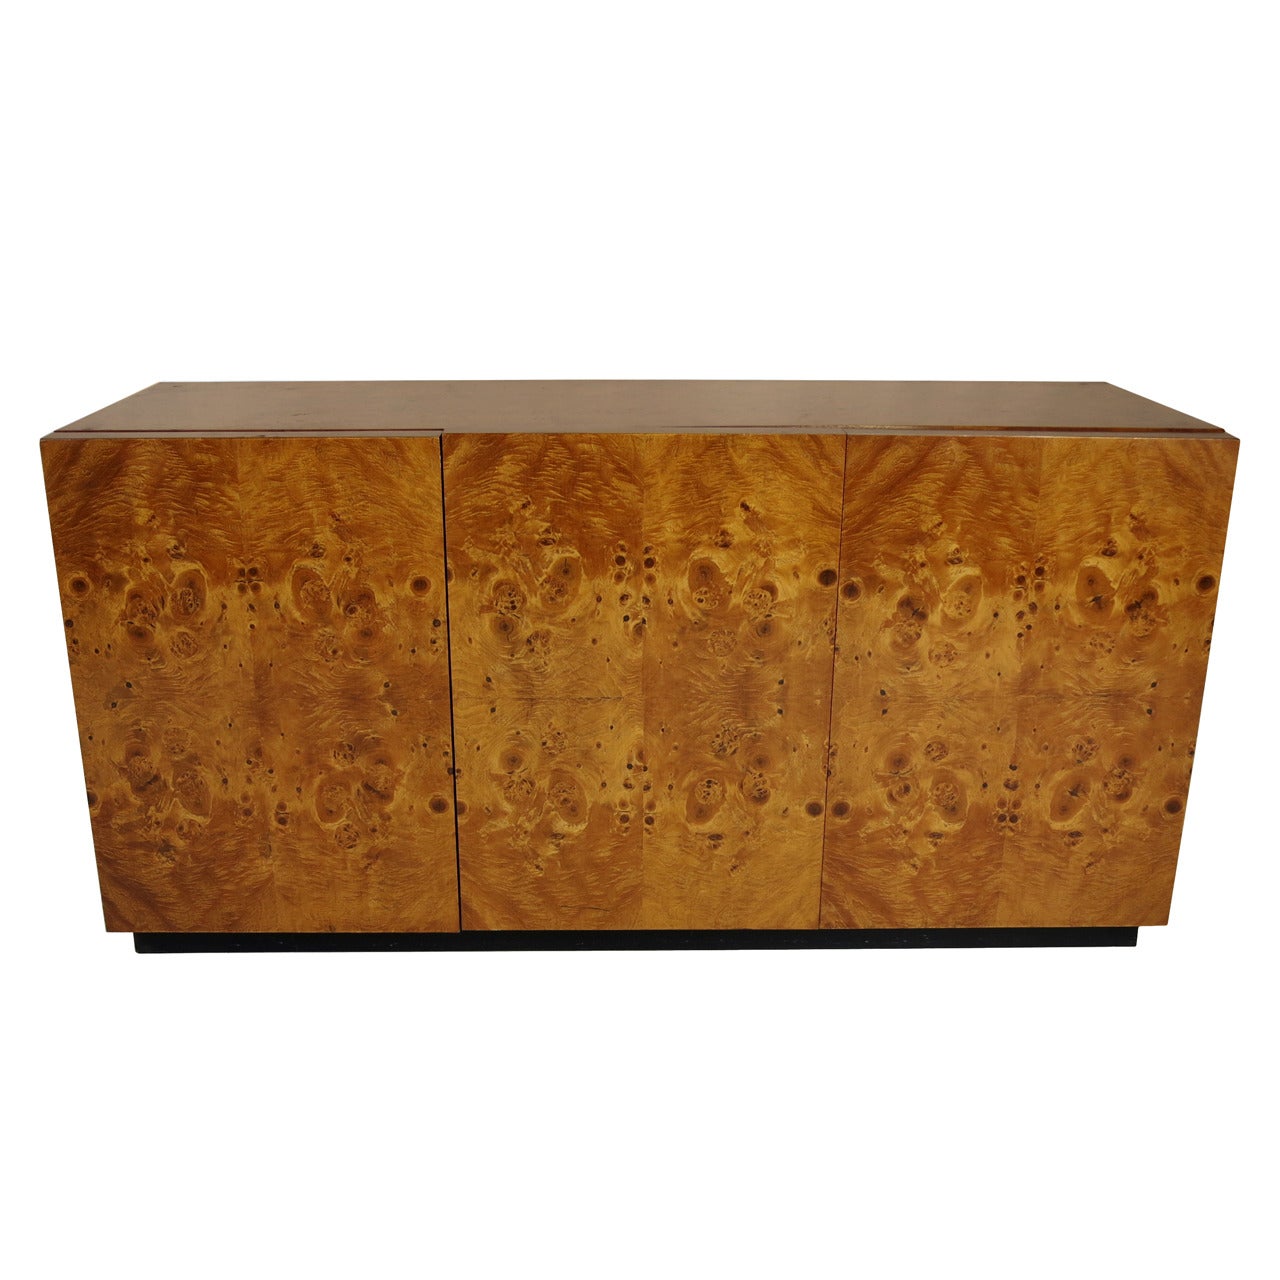 Bookmatched Olive Burl Cabinet by Pierre Cardin